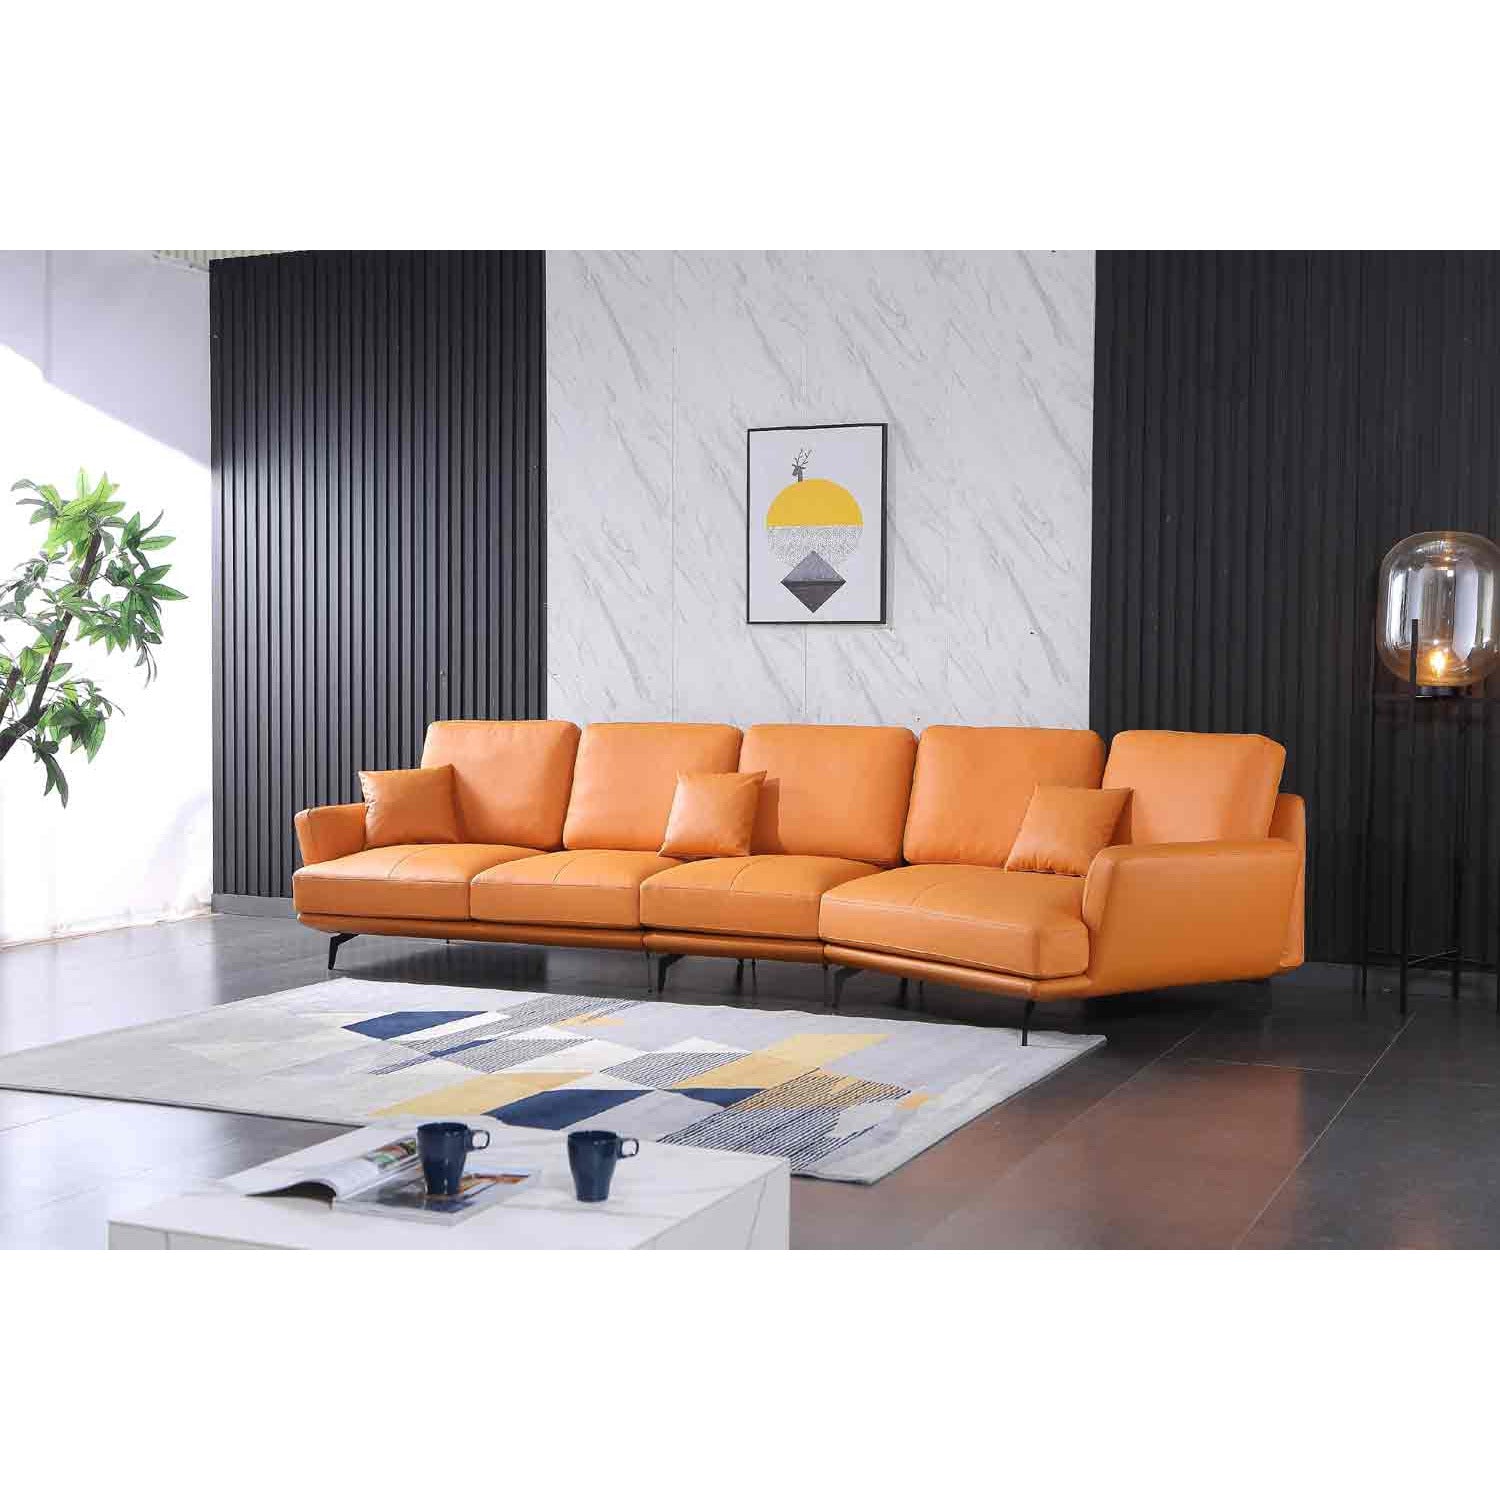 European Furniture - Galaxy Right Hand Chaise Sectional in Smokey Orange - 54430R-3RHC - New Star Living